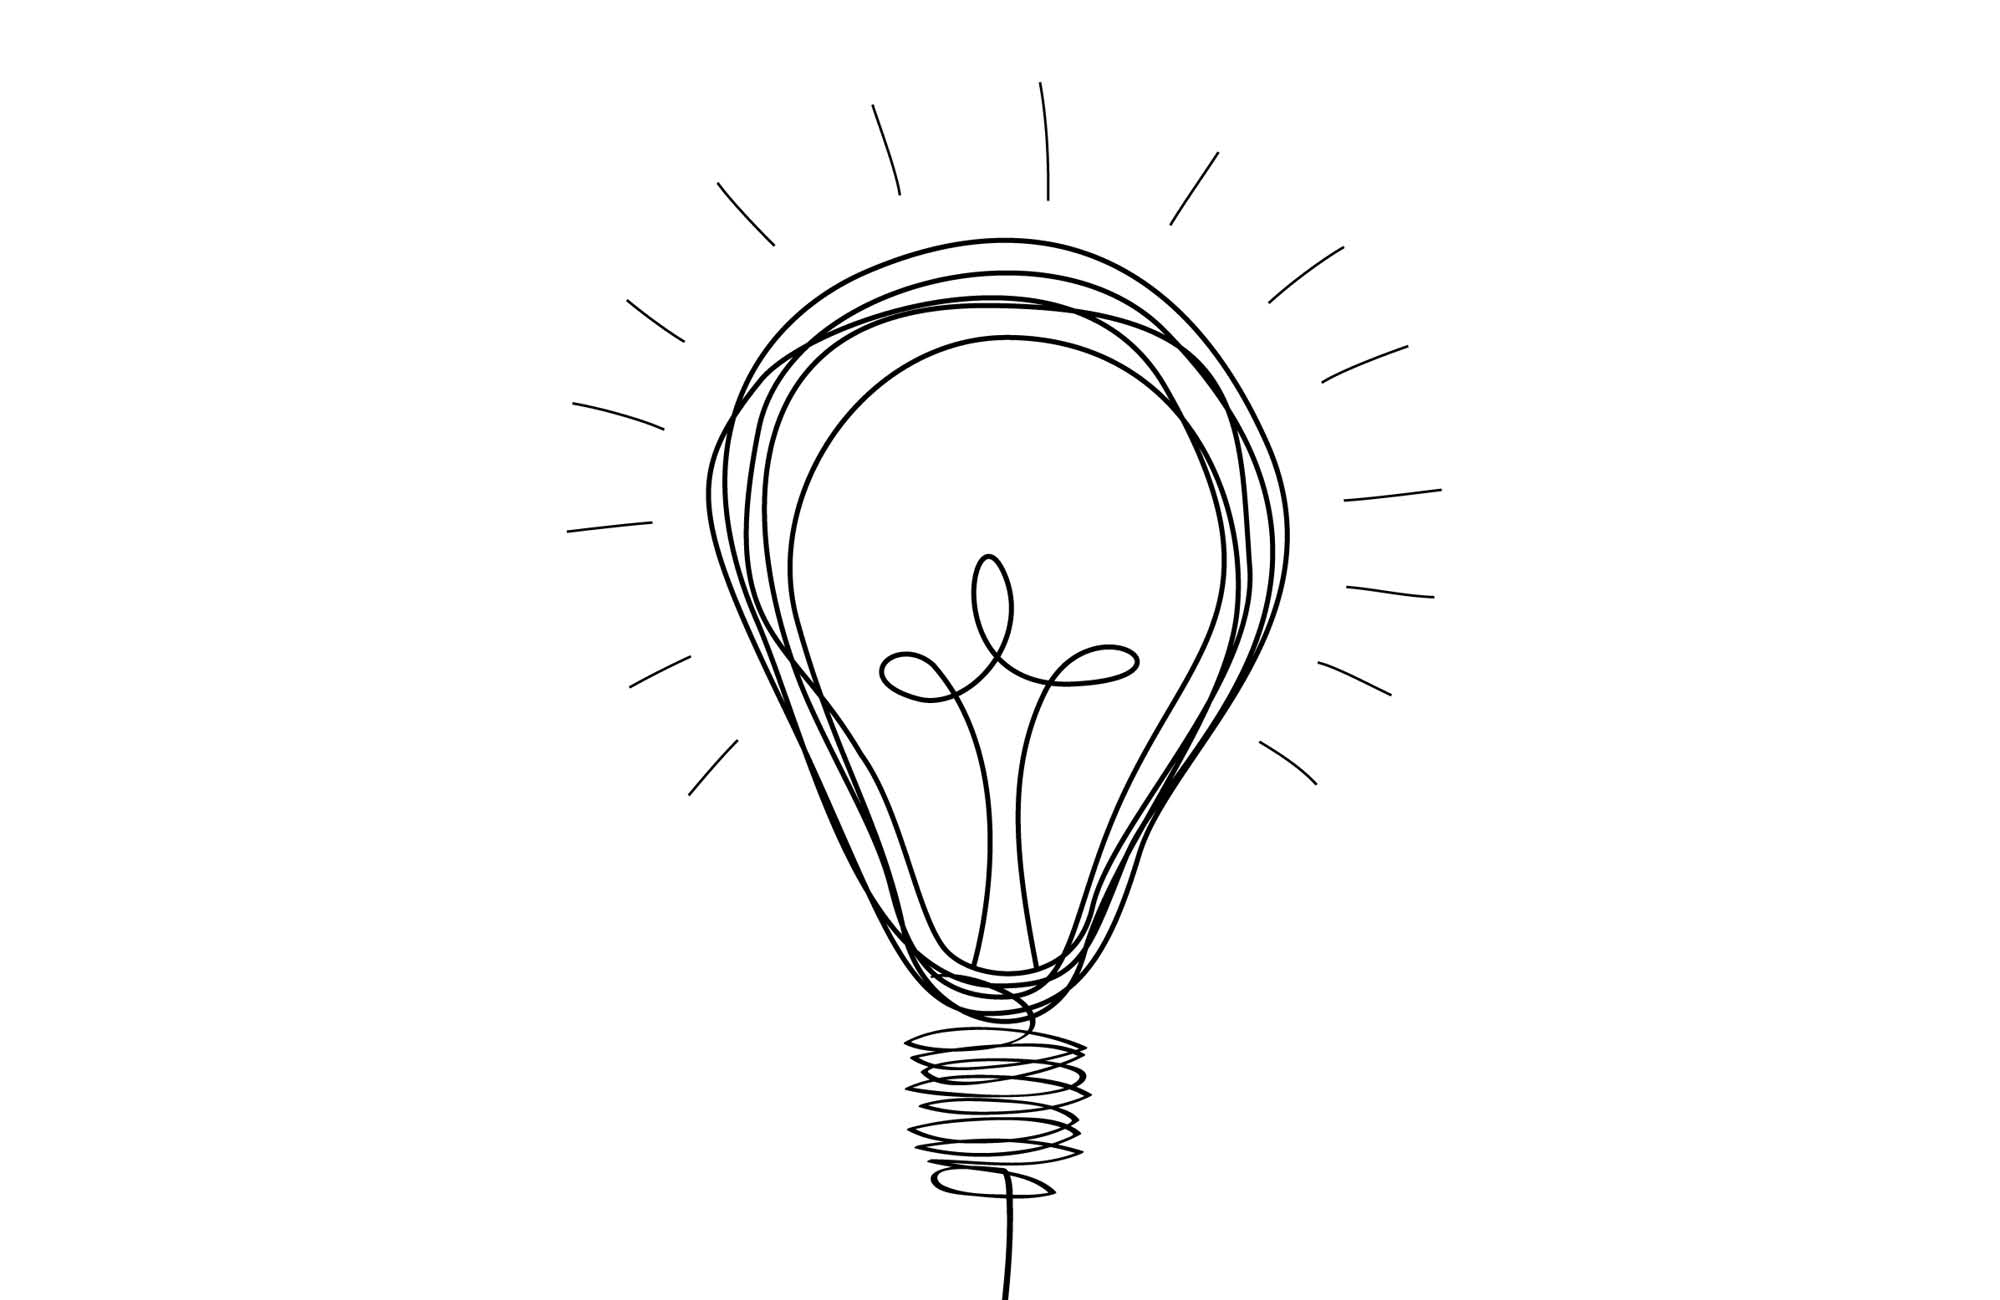 Light bulb symbolic forthe idea and decision of the customer for a product development